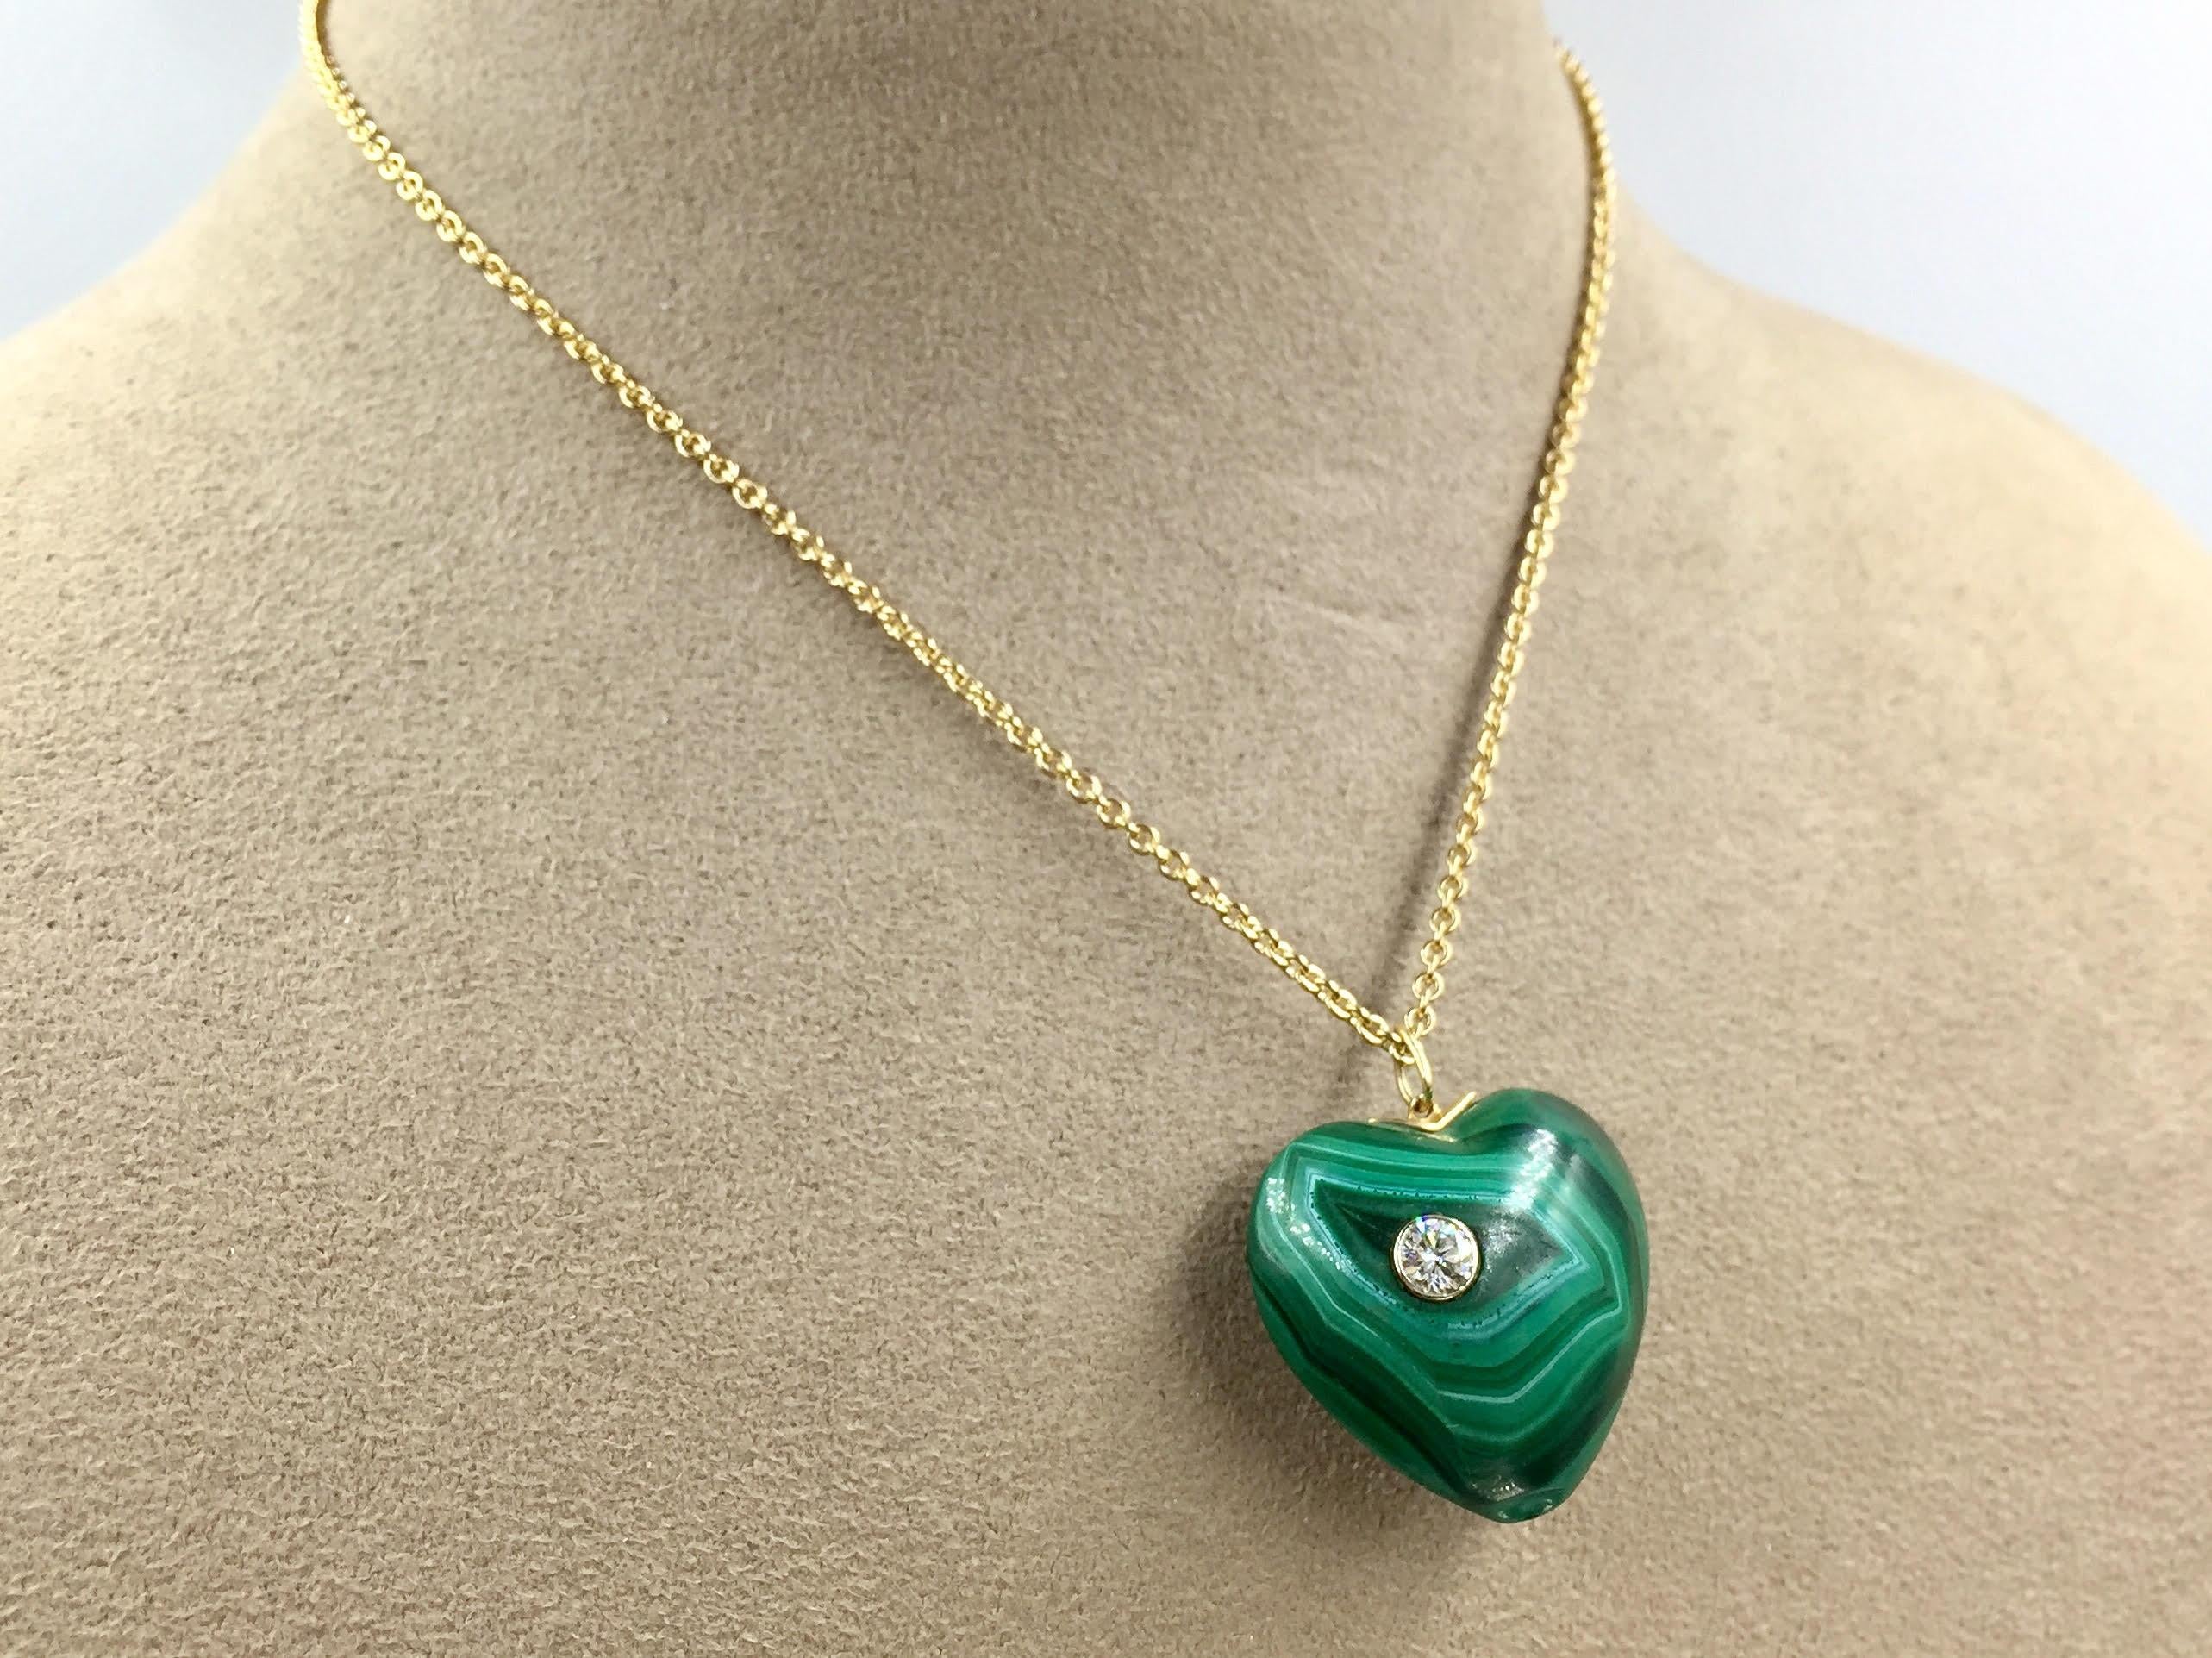 Circa 1970. A beautiful, large piece of genuine malachite is carved into a heart and features one burnish-set round brilliant diamond. The diamond is approximately .30 carats, G color, VS2 clarity. The pendant comes with a 15